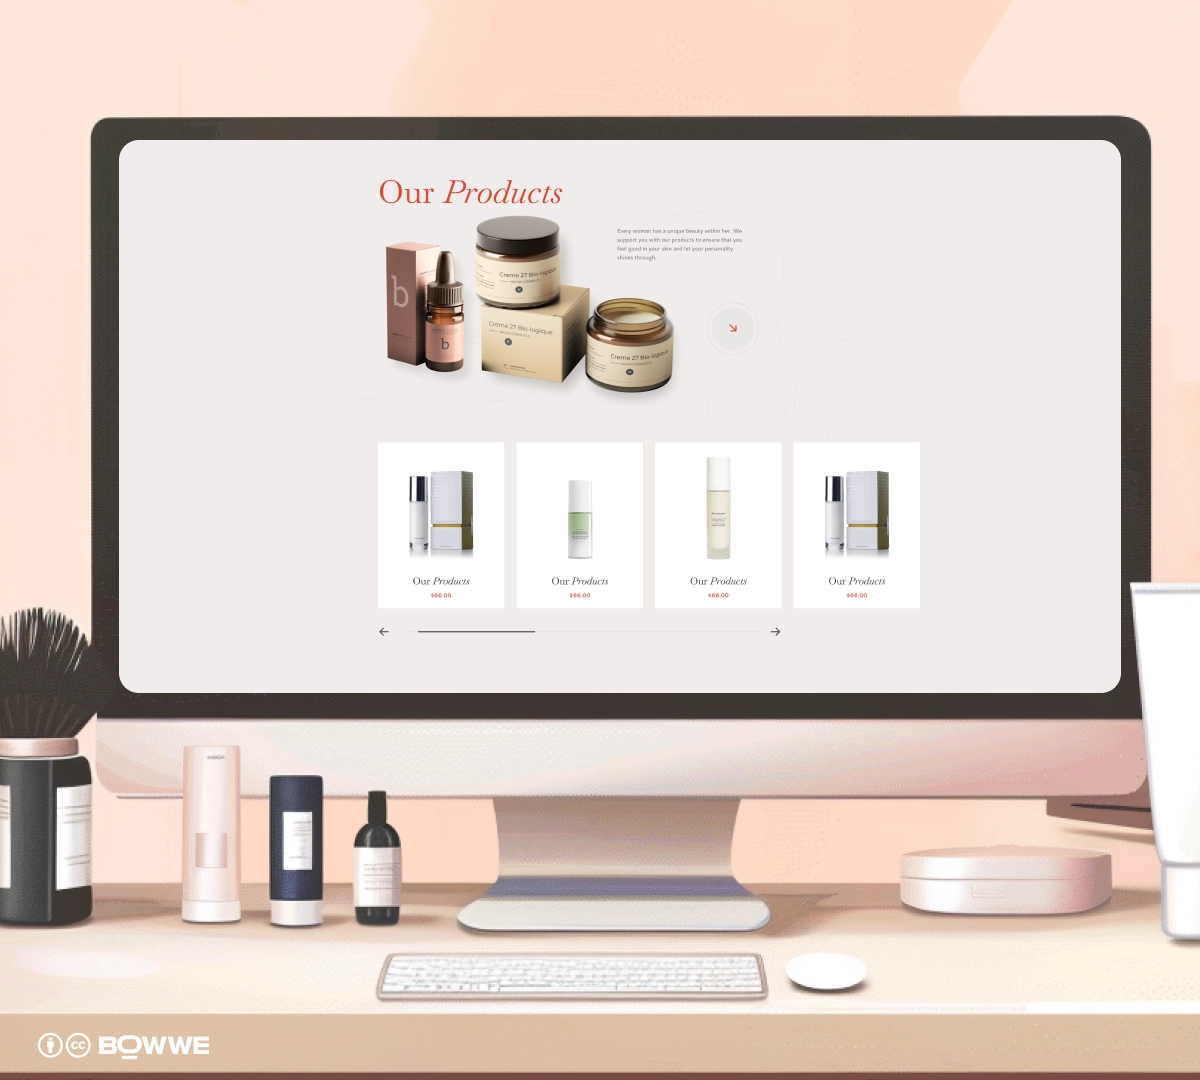 monitor with SPA website template with section "Online Shop"